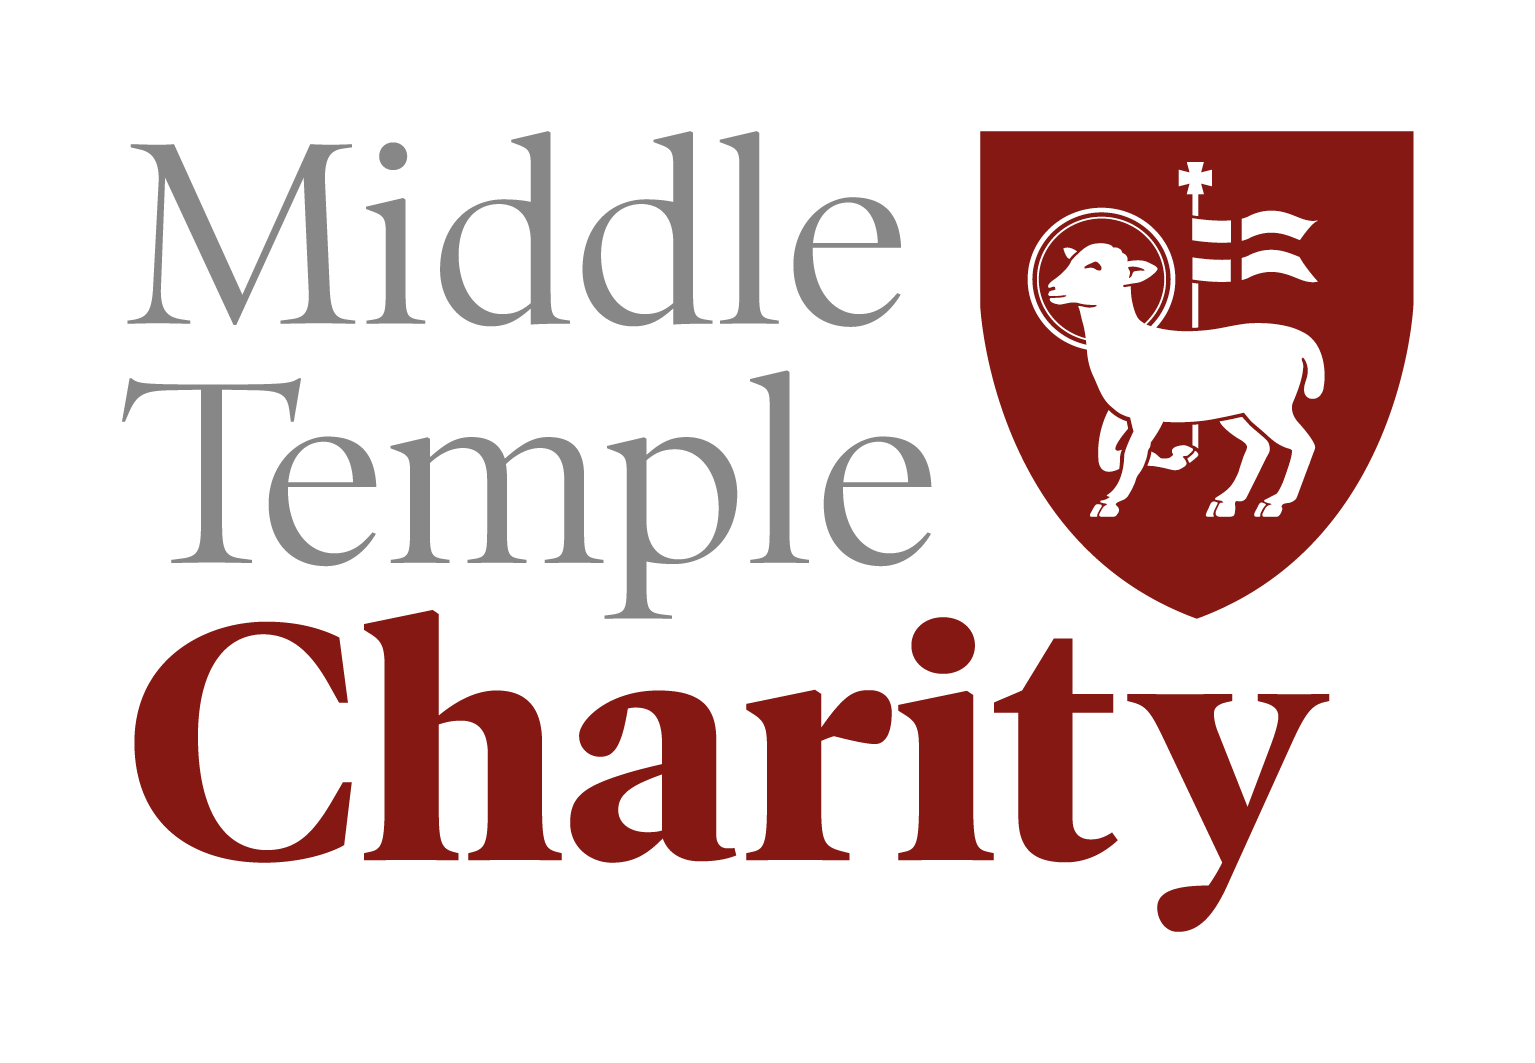 Middle Temple Charity